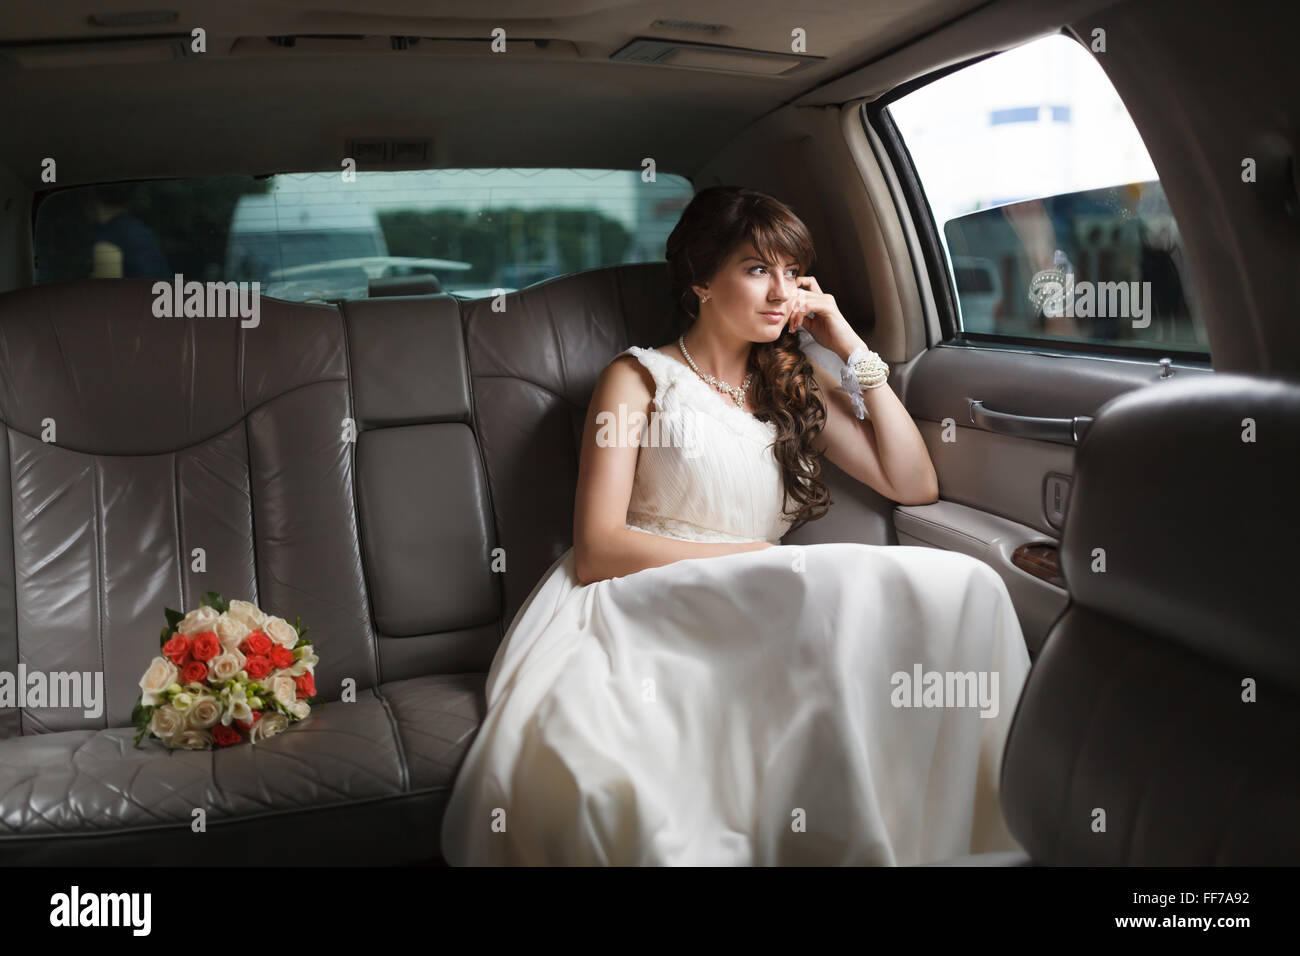 Smiling bride looking out the window of the car Stock Photo